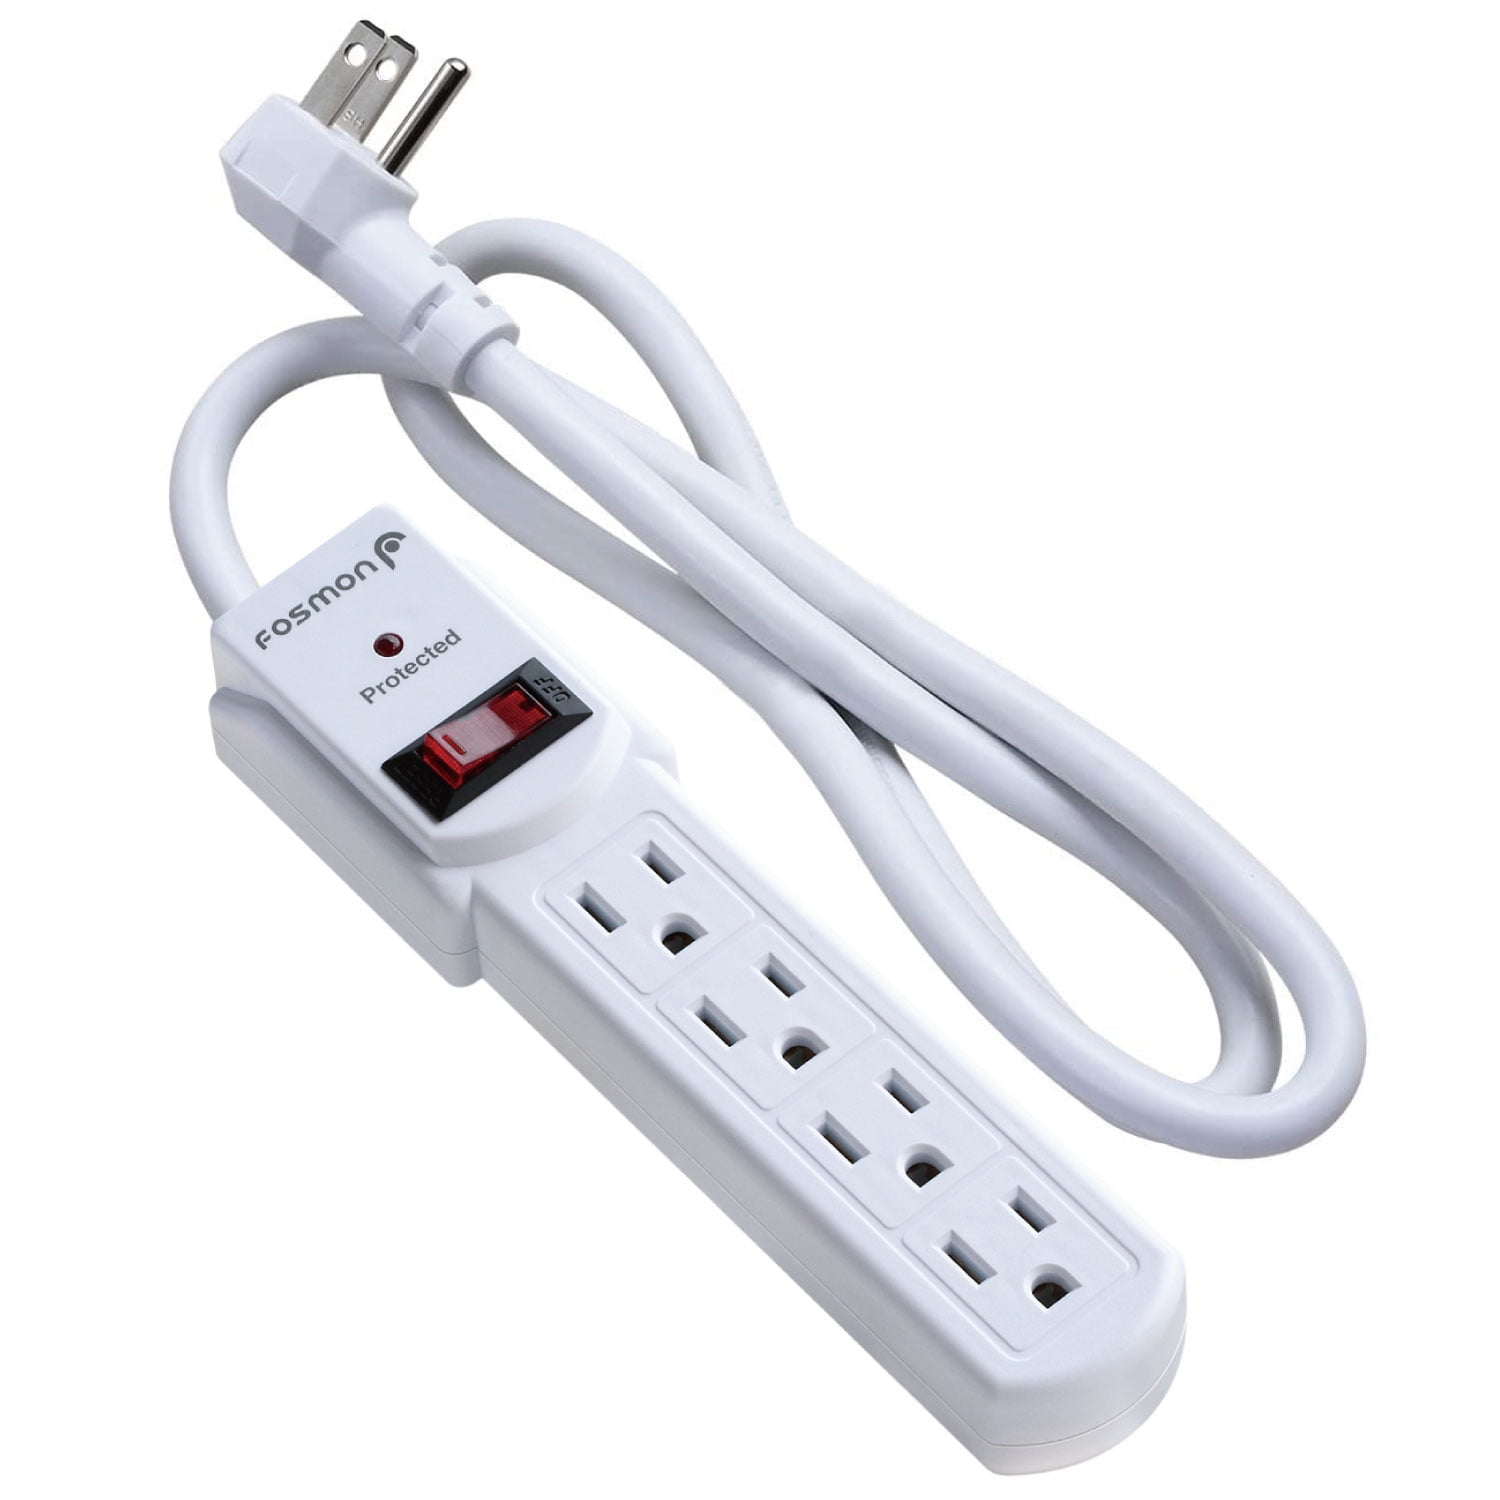 Outlet Surge Protector Power Strip Heavy Duty With Flat Plug For Home Appliance 